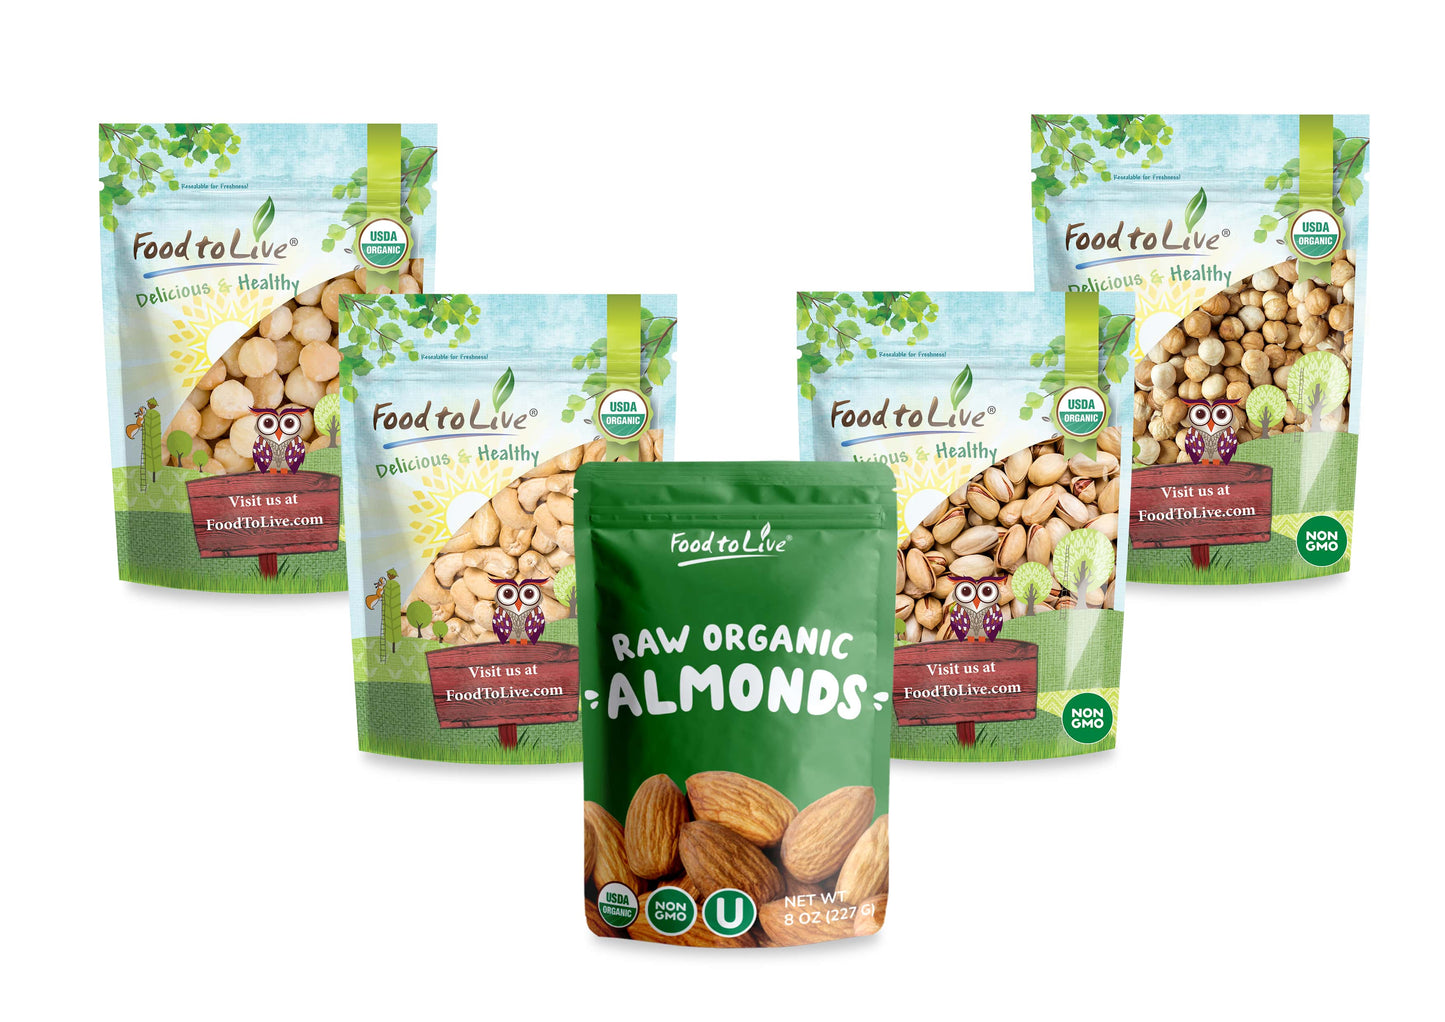 Organic Brooklyn Nuts Gift Box - Roasted Blanched Hazelnuts, Roasted and Salted Pistachios, Raw Cashews, Almonds, Macadamia Nuts